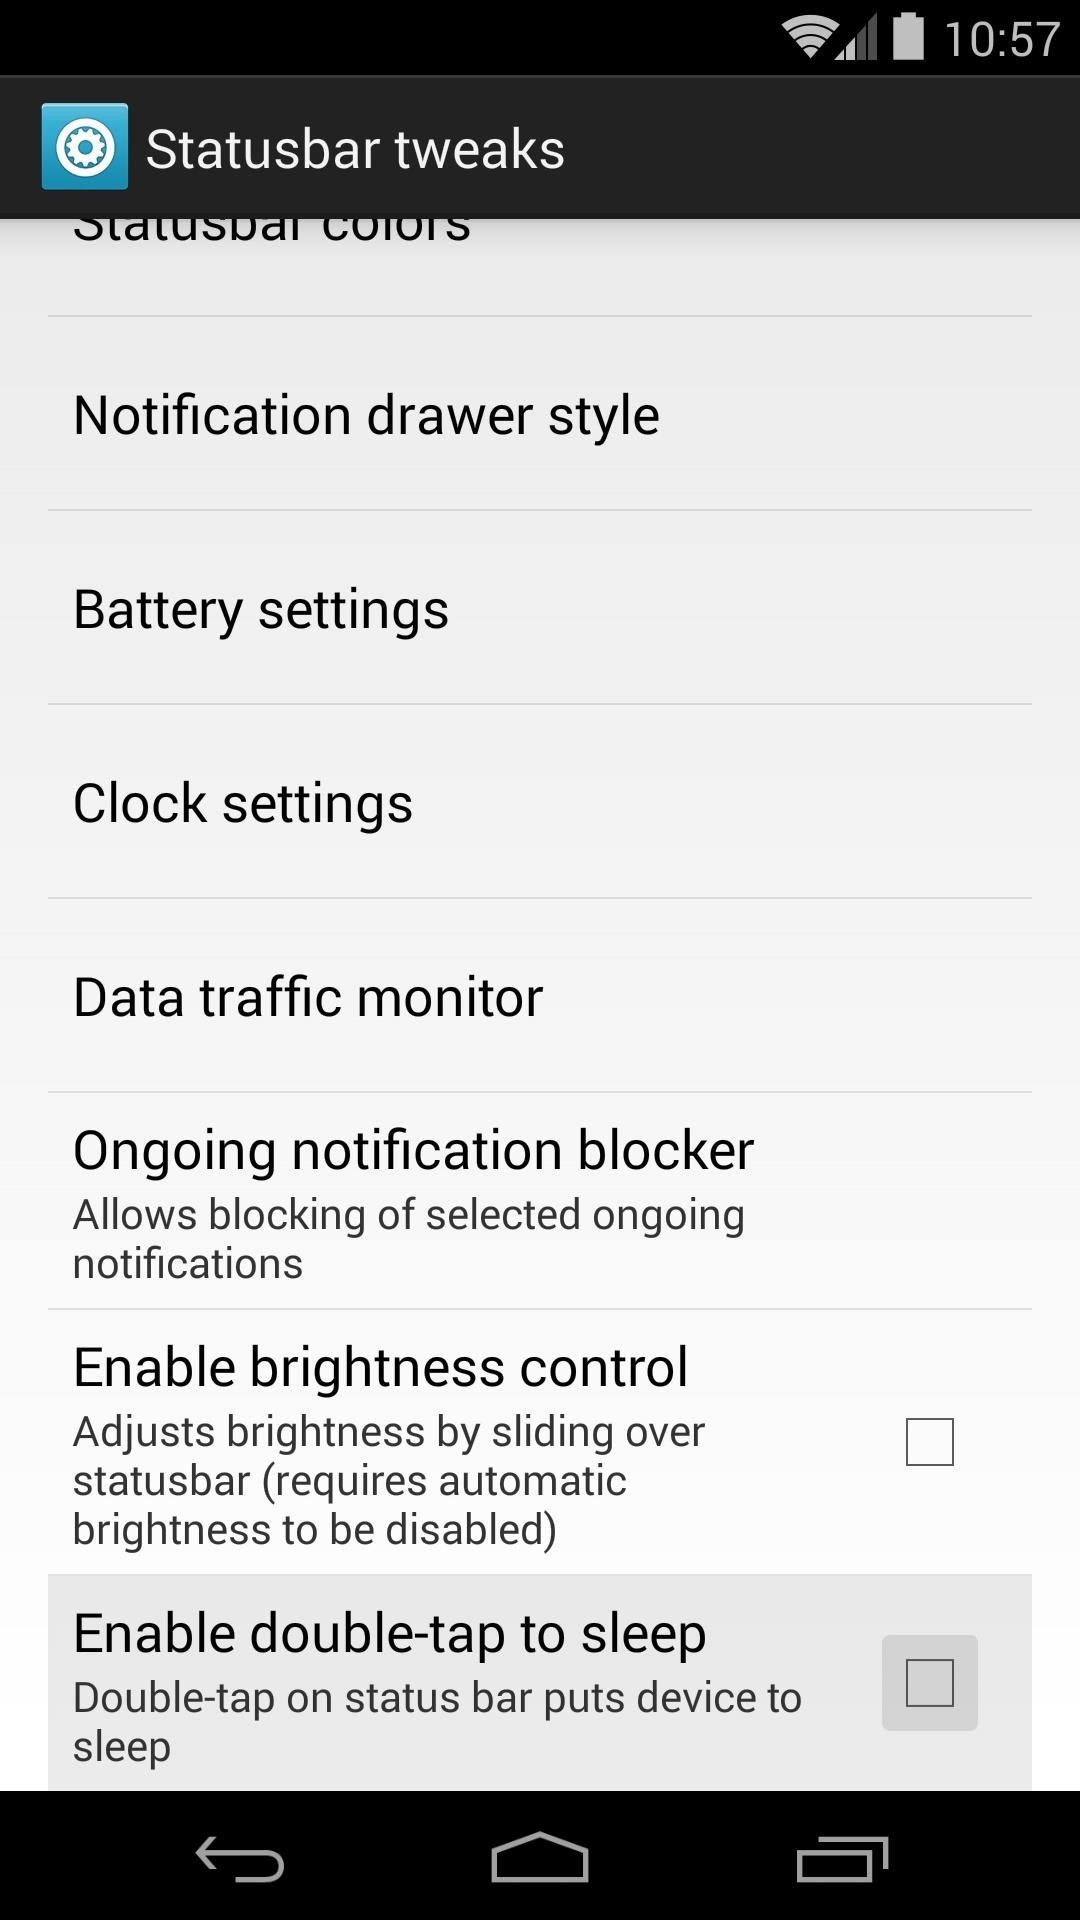 How to Get All the LG G2 “Knock Knock” Features on Your Nexus 5 for Faster Sleep/Wake